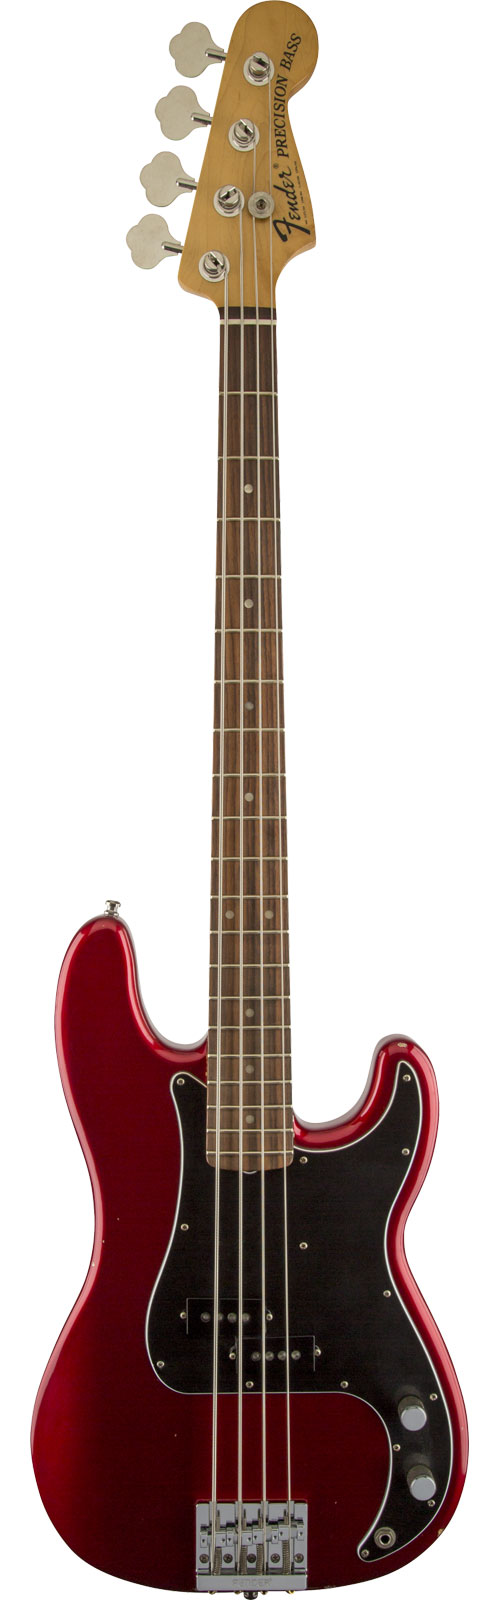 FENDER NATE MENDEL P BASS RW, CANDY APPLE RED